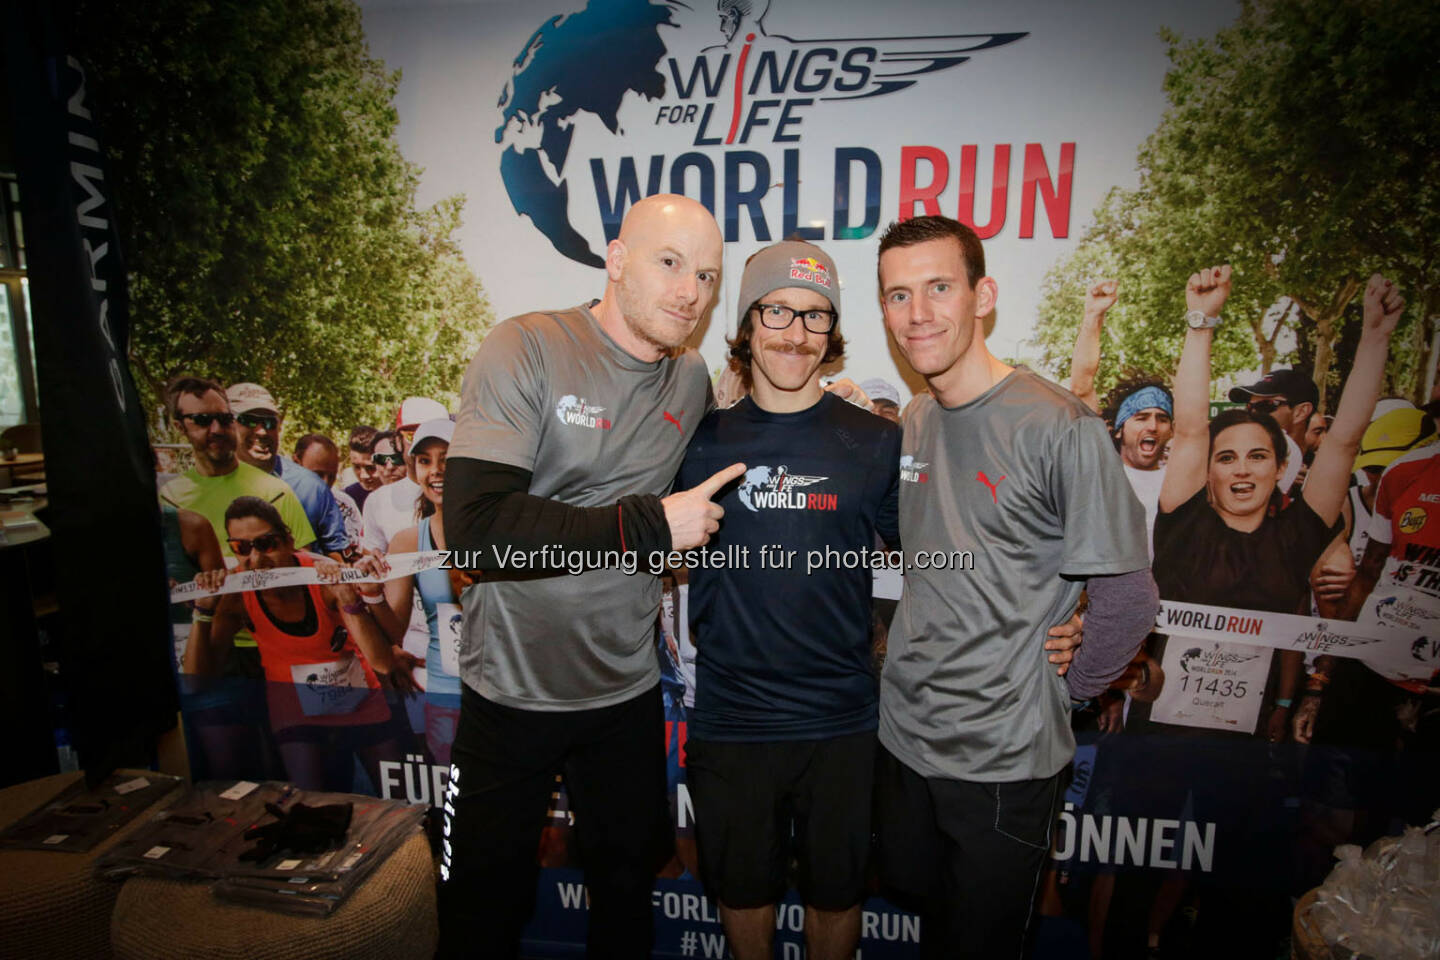 Participants at the Wings for Life World Run event in Munich 23rd of January 2016, Thomas Rottenberg on the left  (Bild: Daniel Grund)